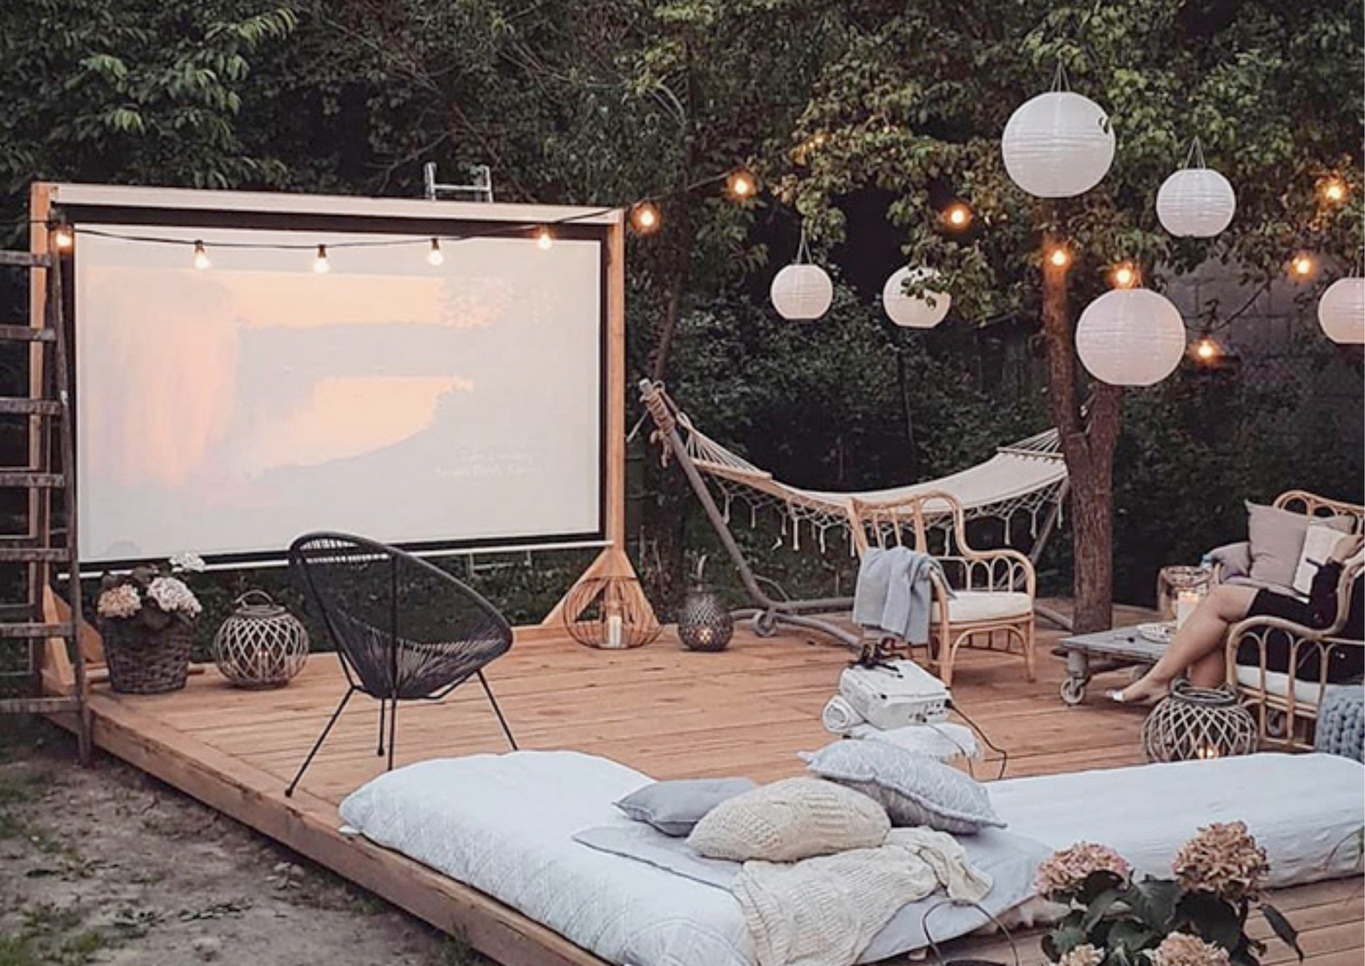 Outdoor cinema set up with lots of soft lighting